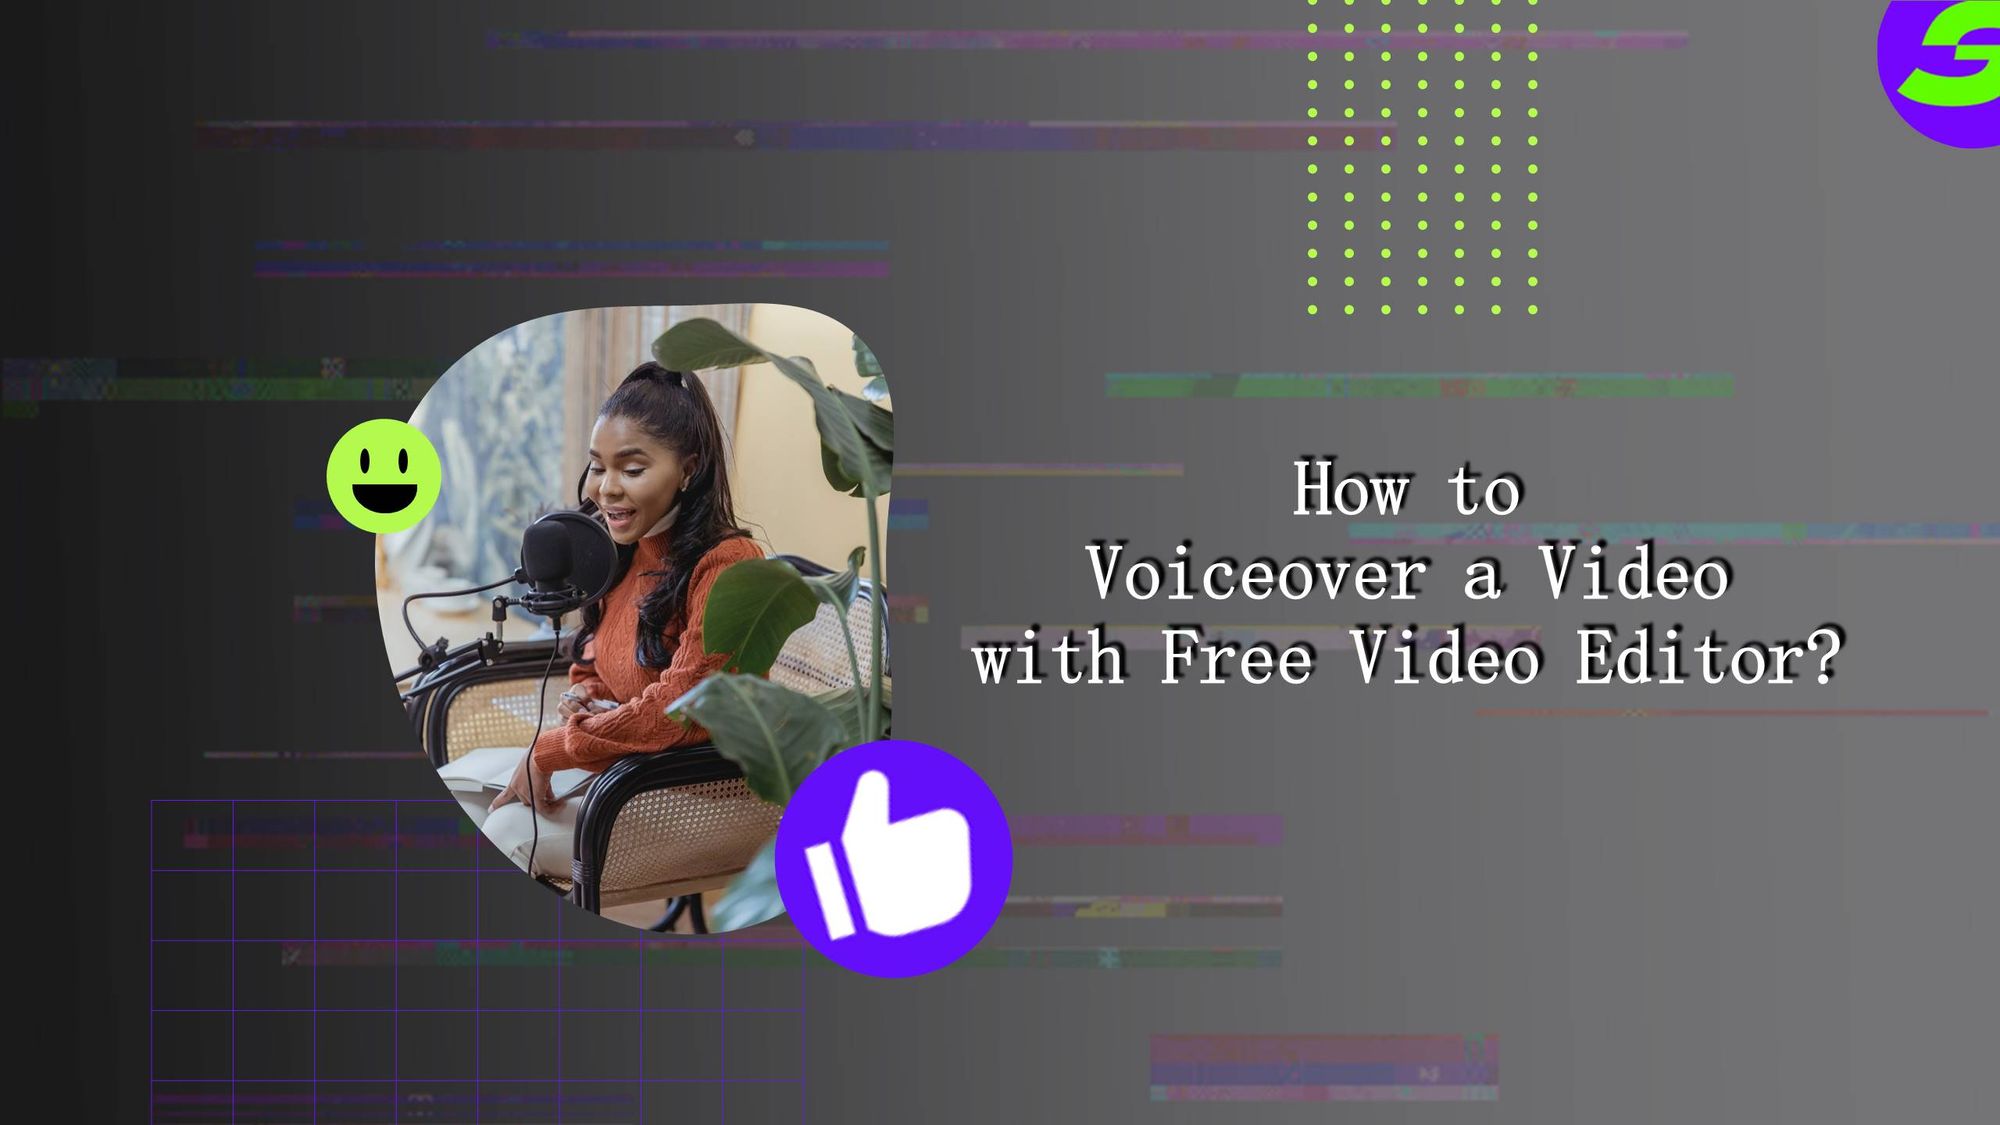 Voiceover a Video with ShotCut Free Video Editor